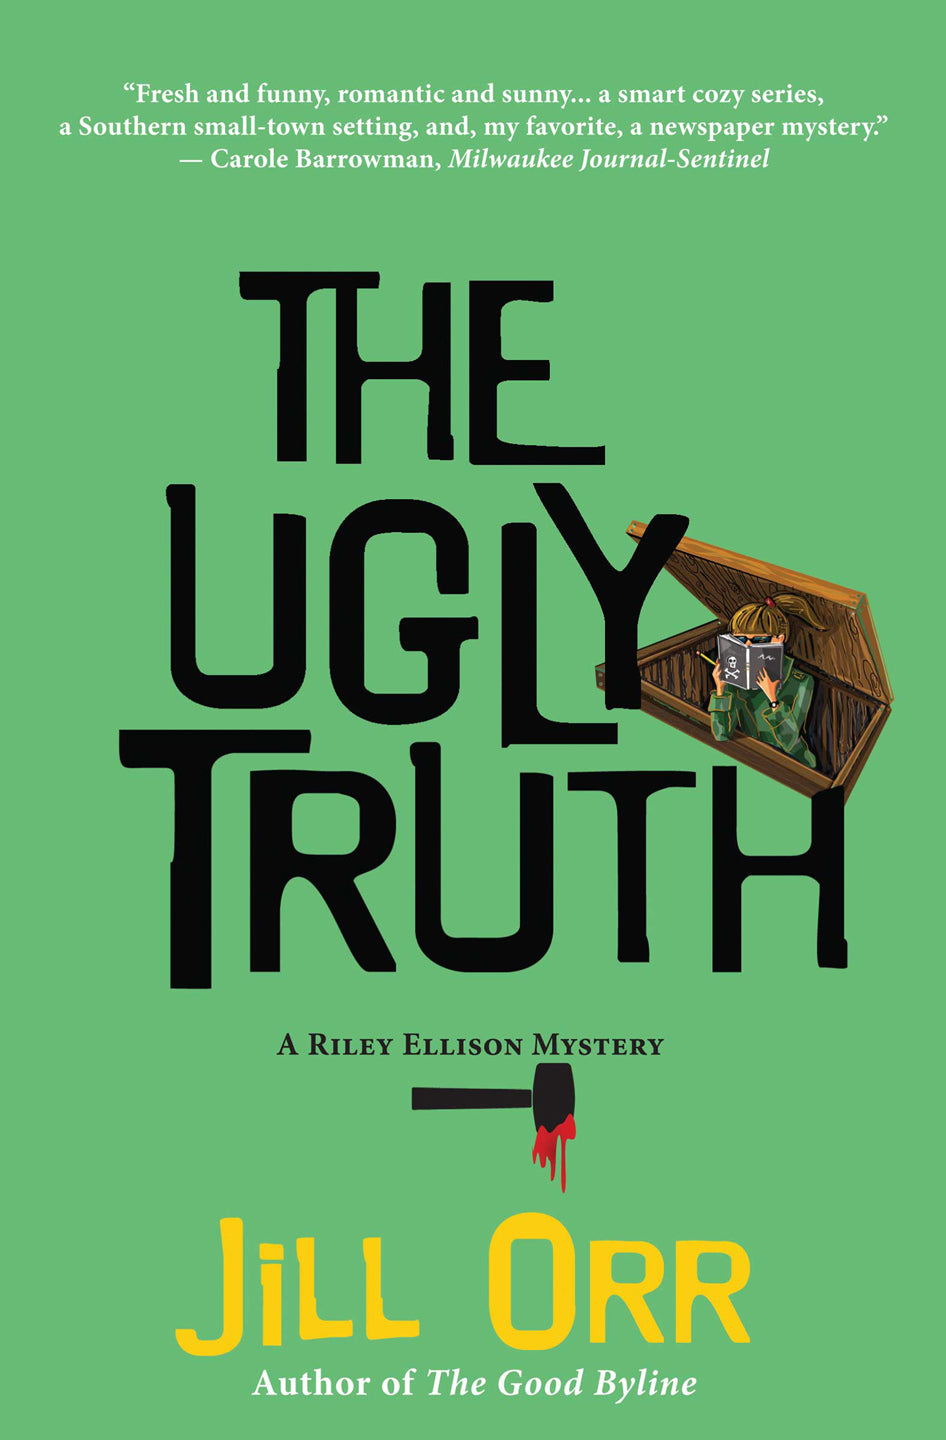 The Ugly Truth (Riley Ellison Mysteries Book #3) by Jill Orr